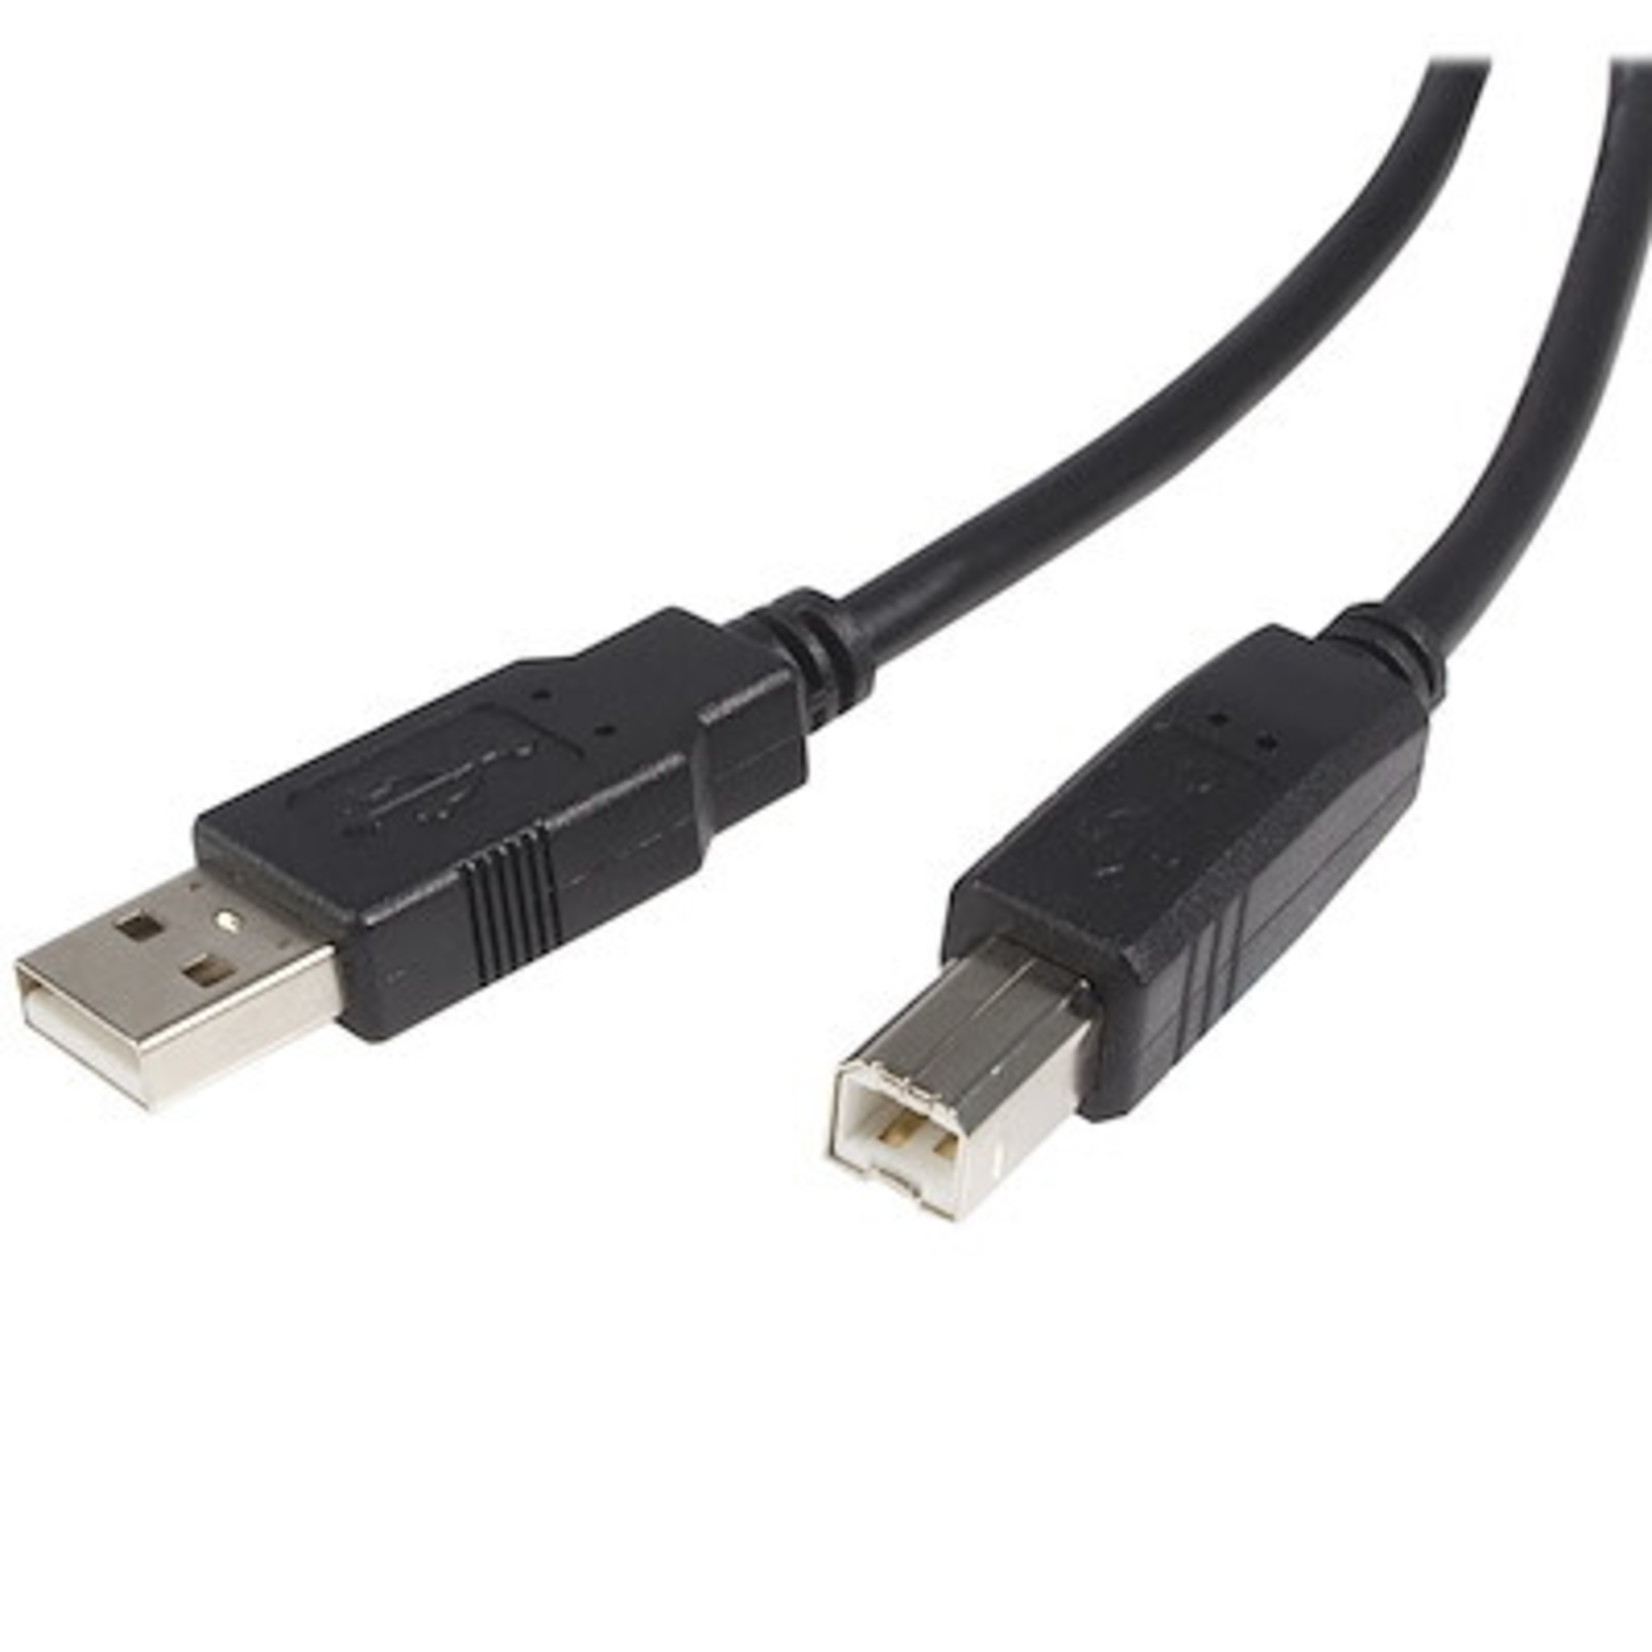 Startech 10' High Speed USB2 Cable